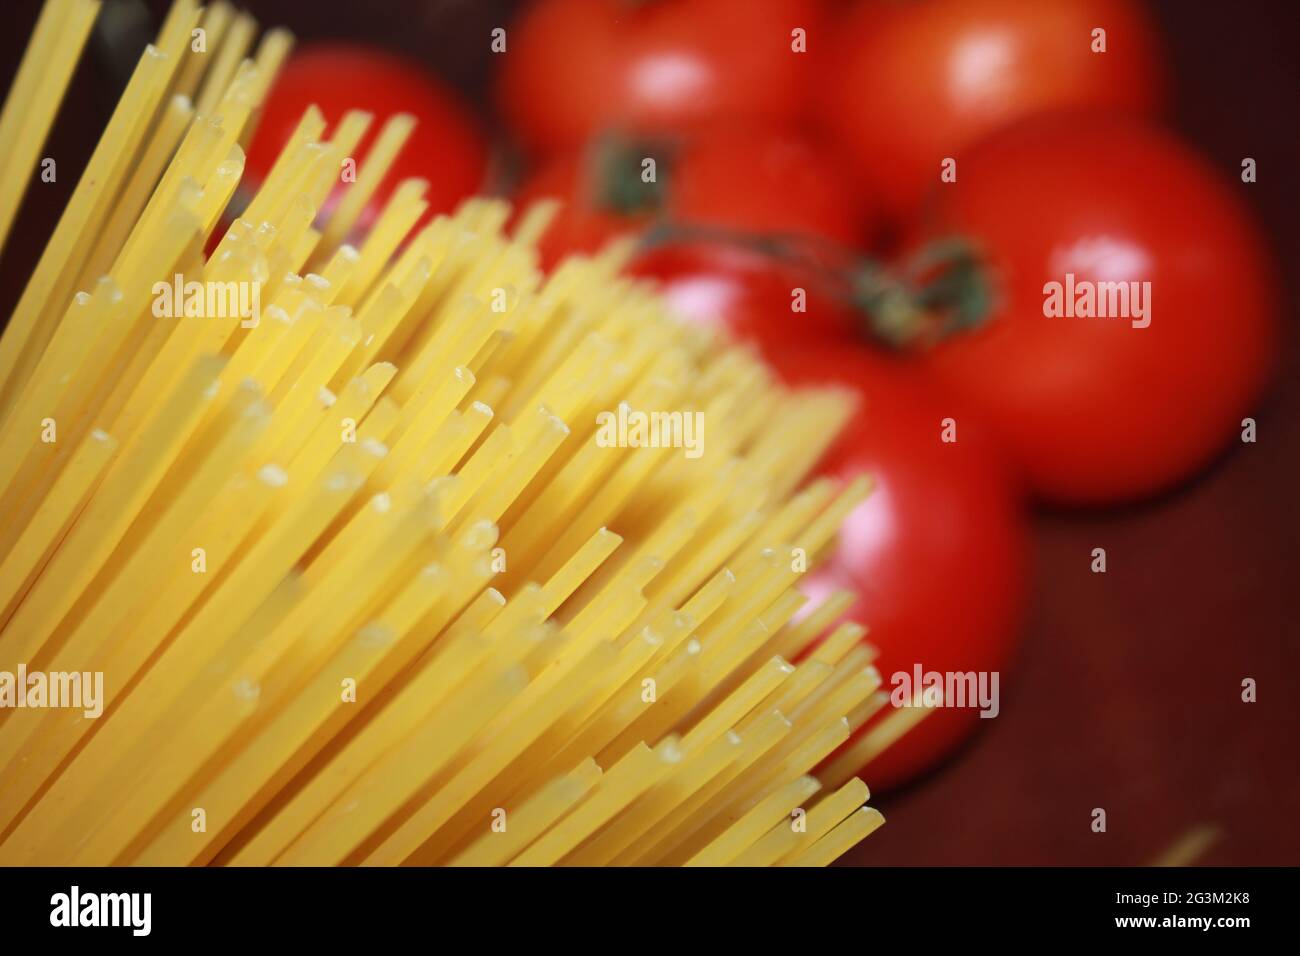 Uncooked spaghetti and tomato closeup photography on a wood background. Stock Photo